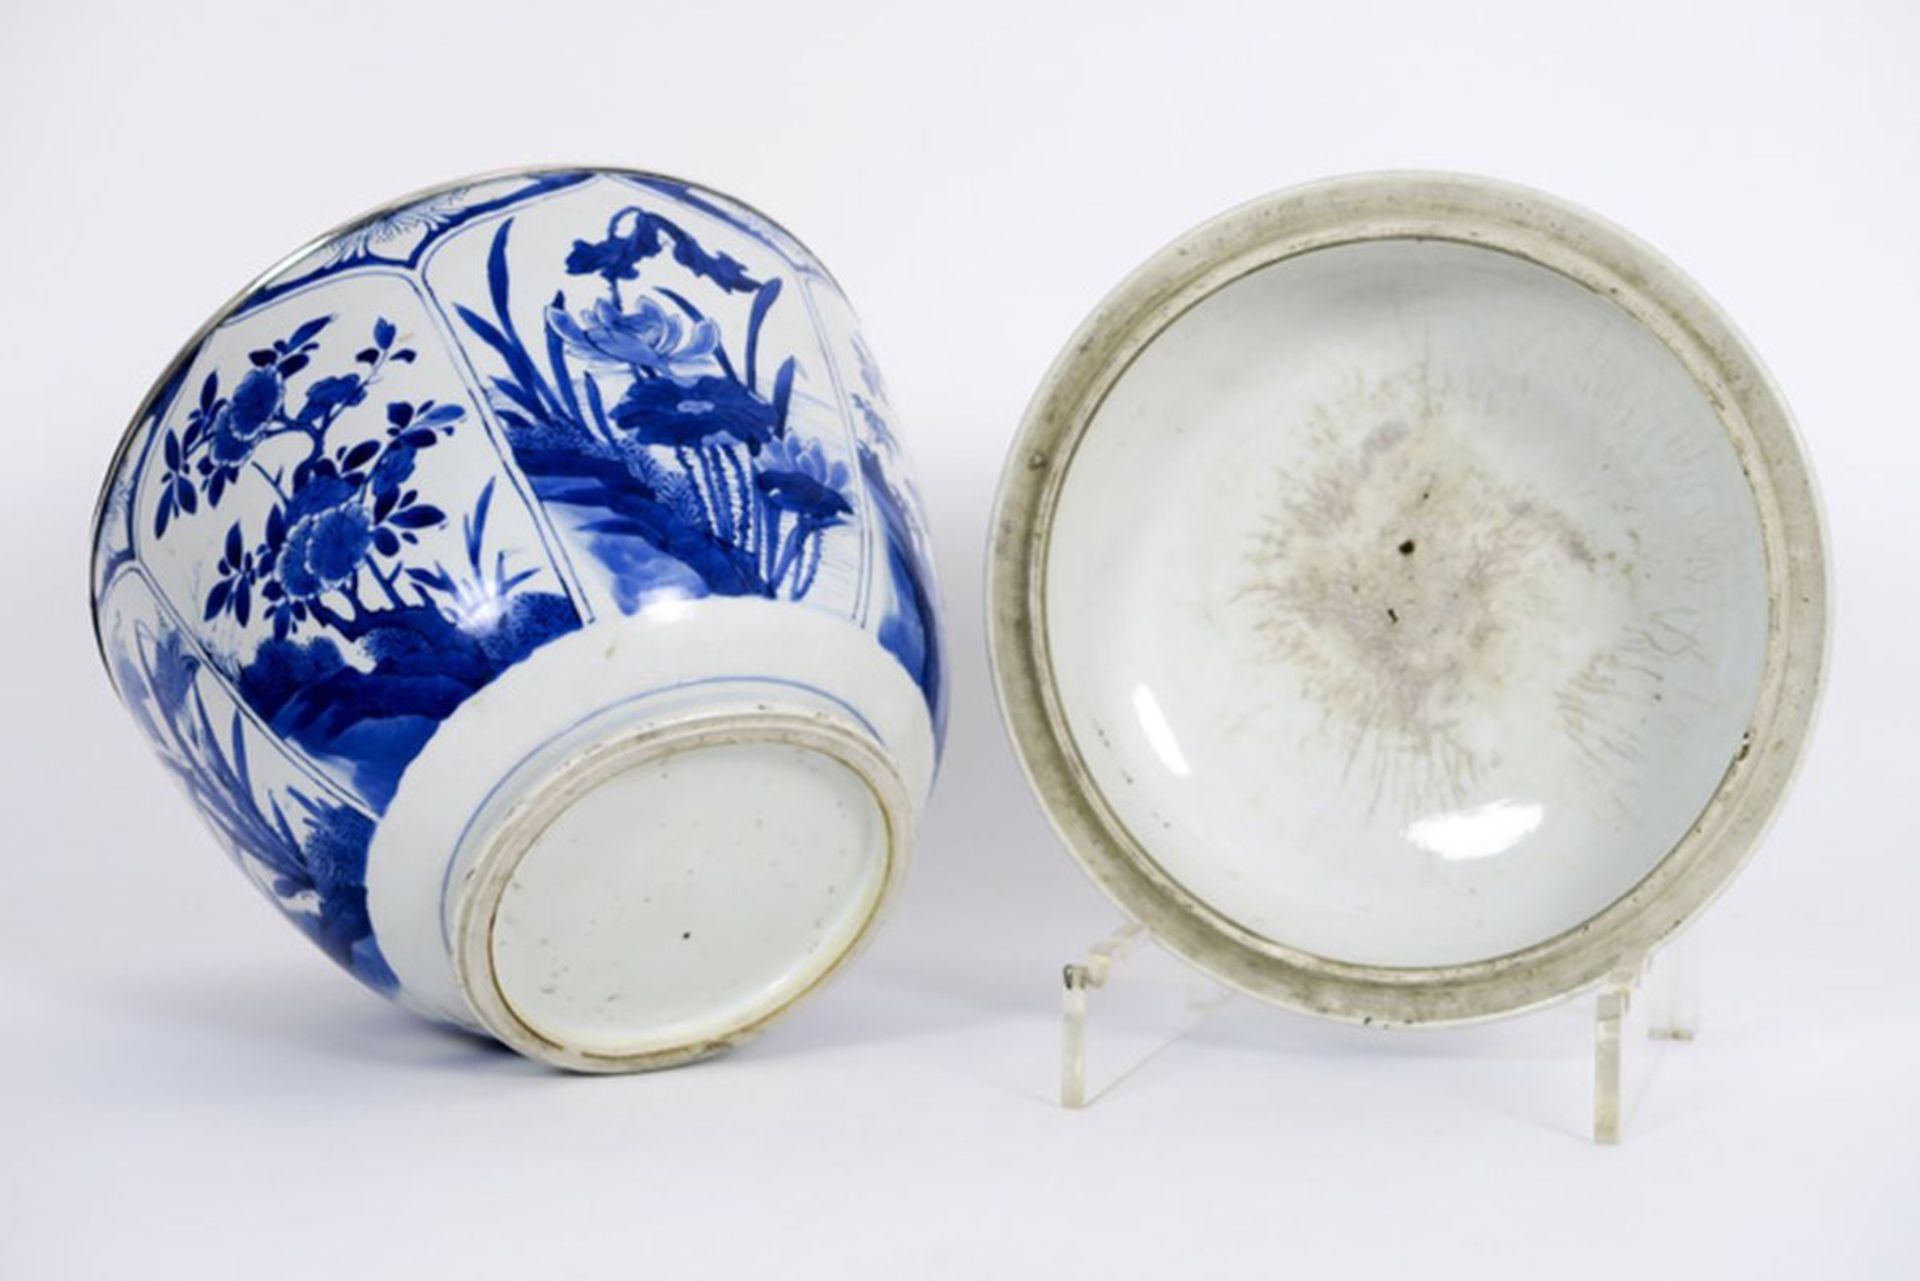 17th Cent. Chinese Kang Hsi lidded bowl in porcelain with a blue-white decor with [...] - Image 4 of 4